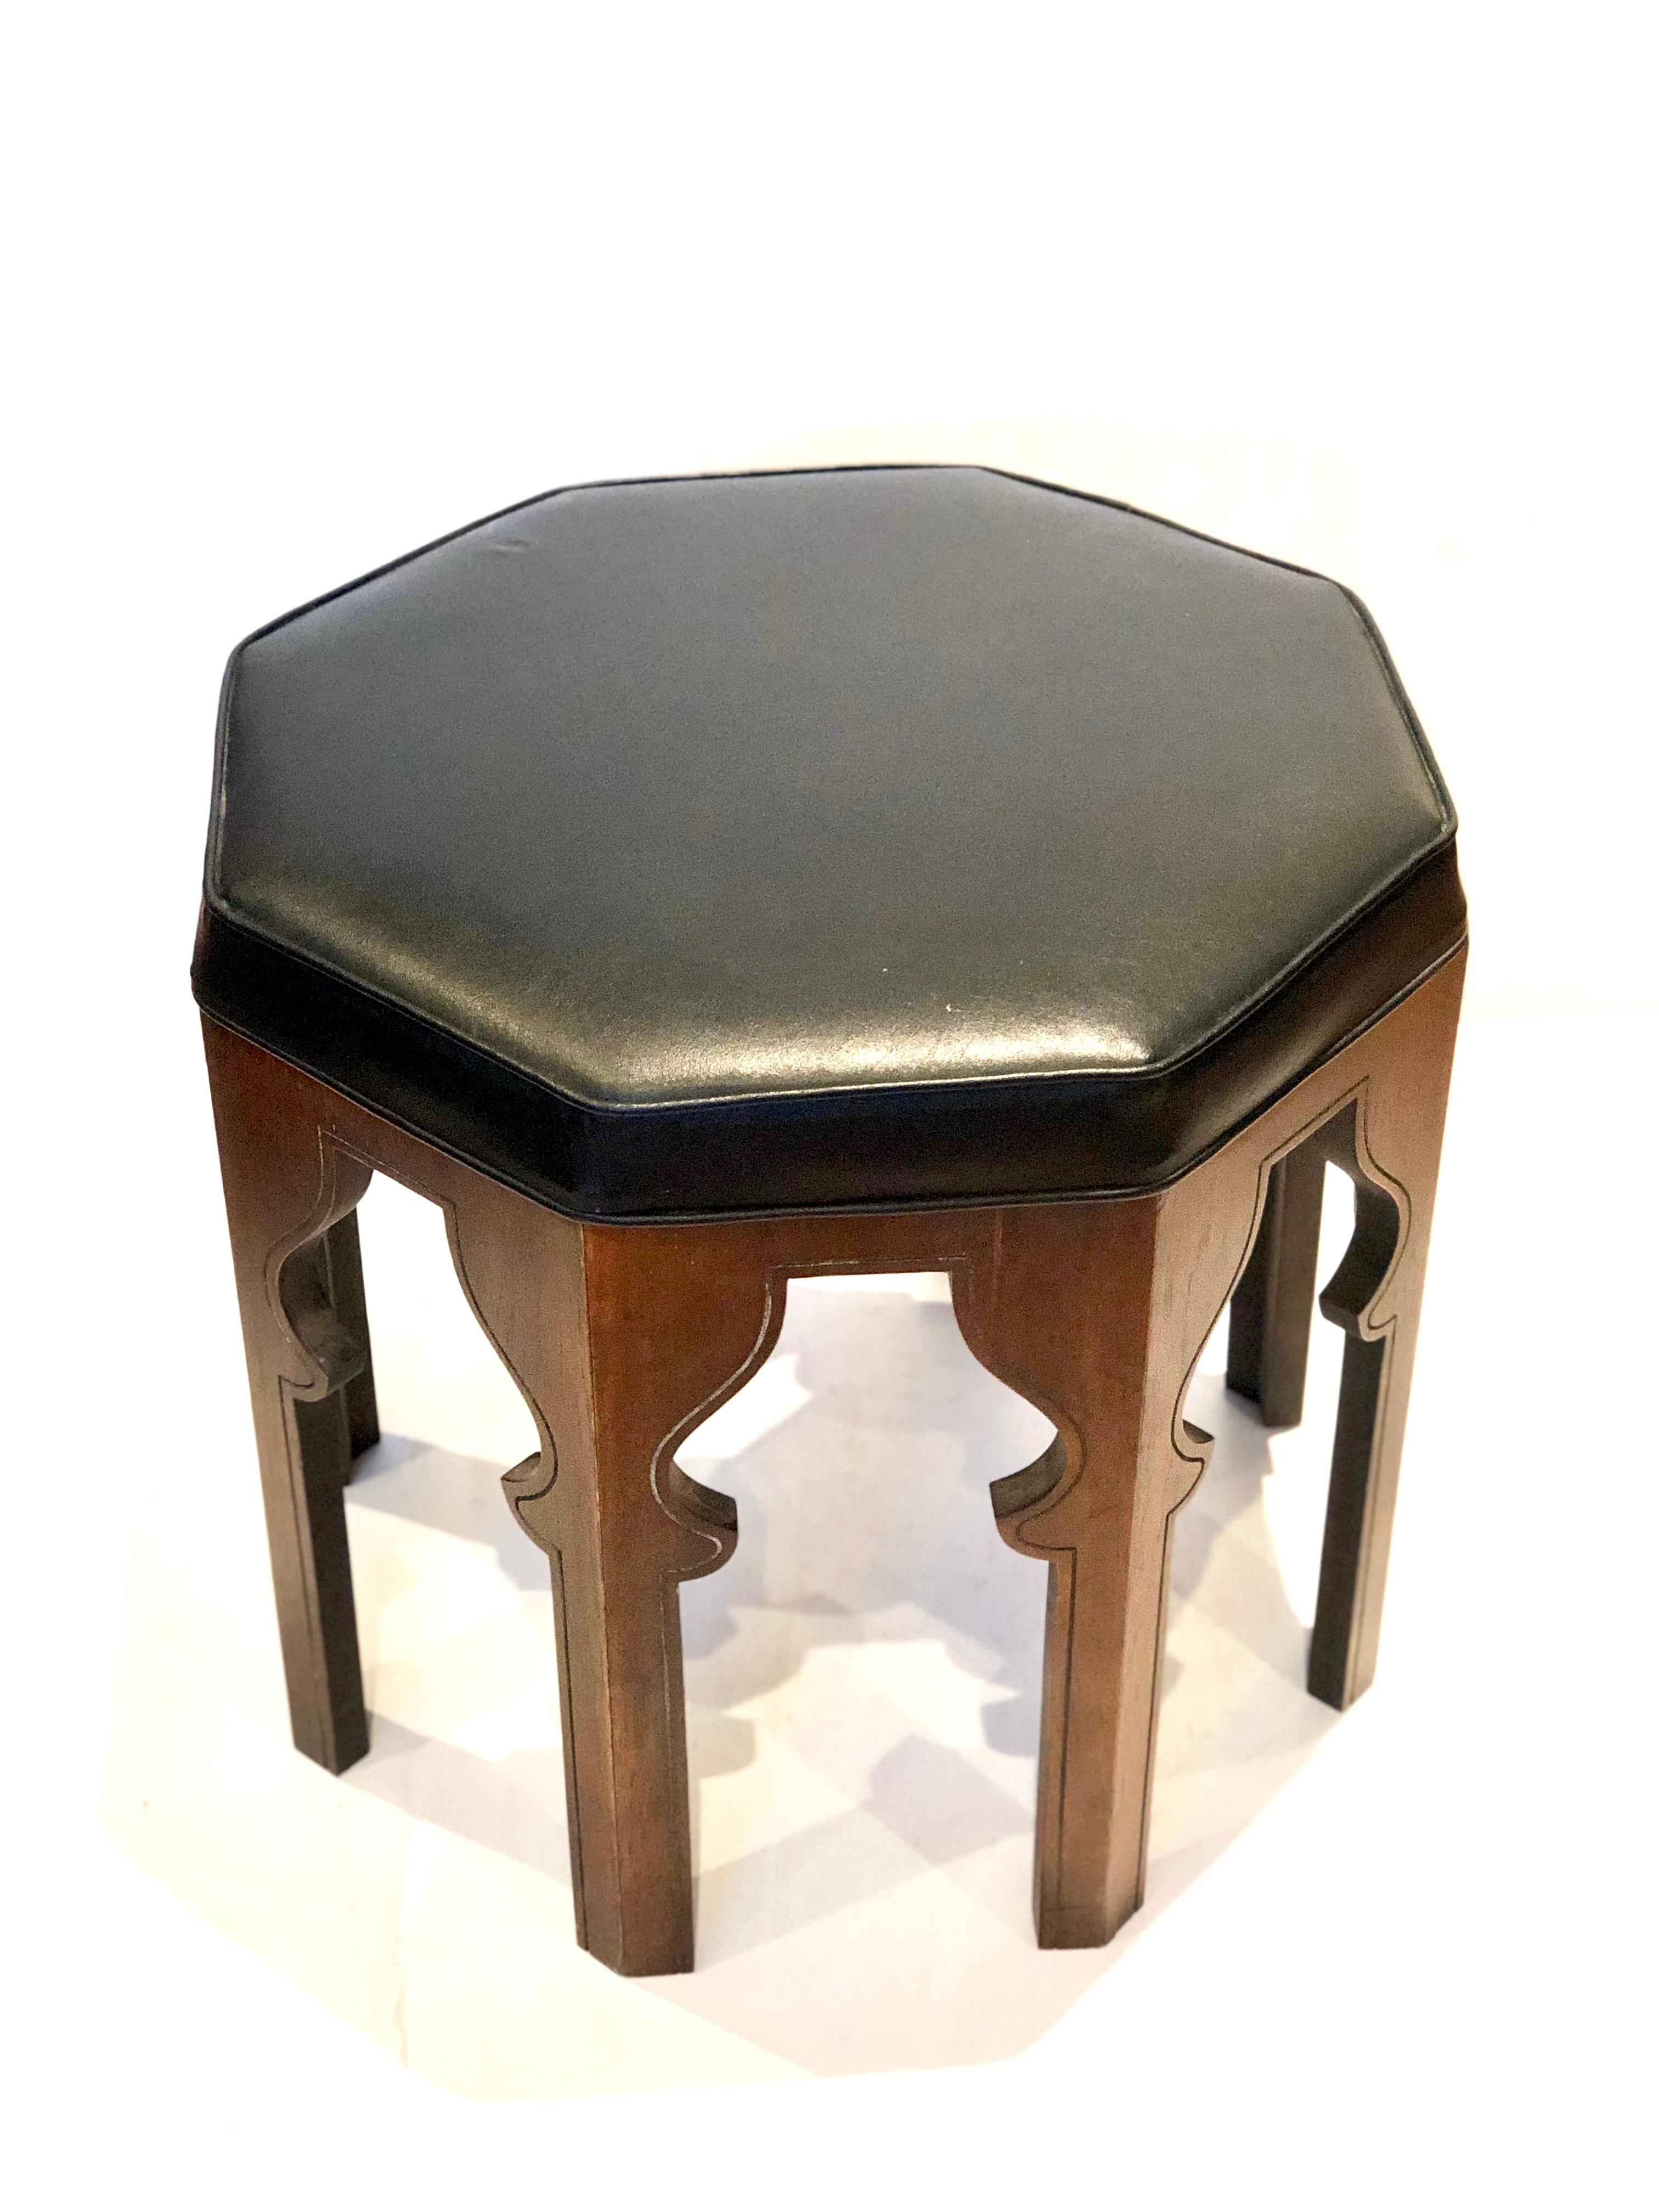 Nice design on this unique Moroccan hexagon stool, circa 1950s in walnut wood base and original naugahyde upholstery. Great accent piece of unique design.